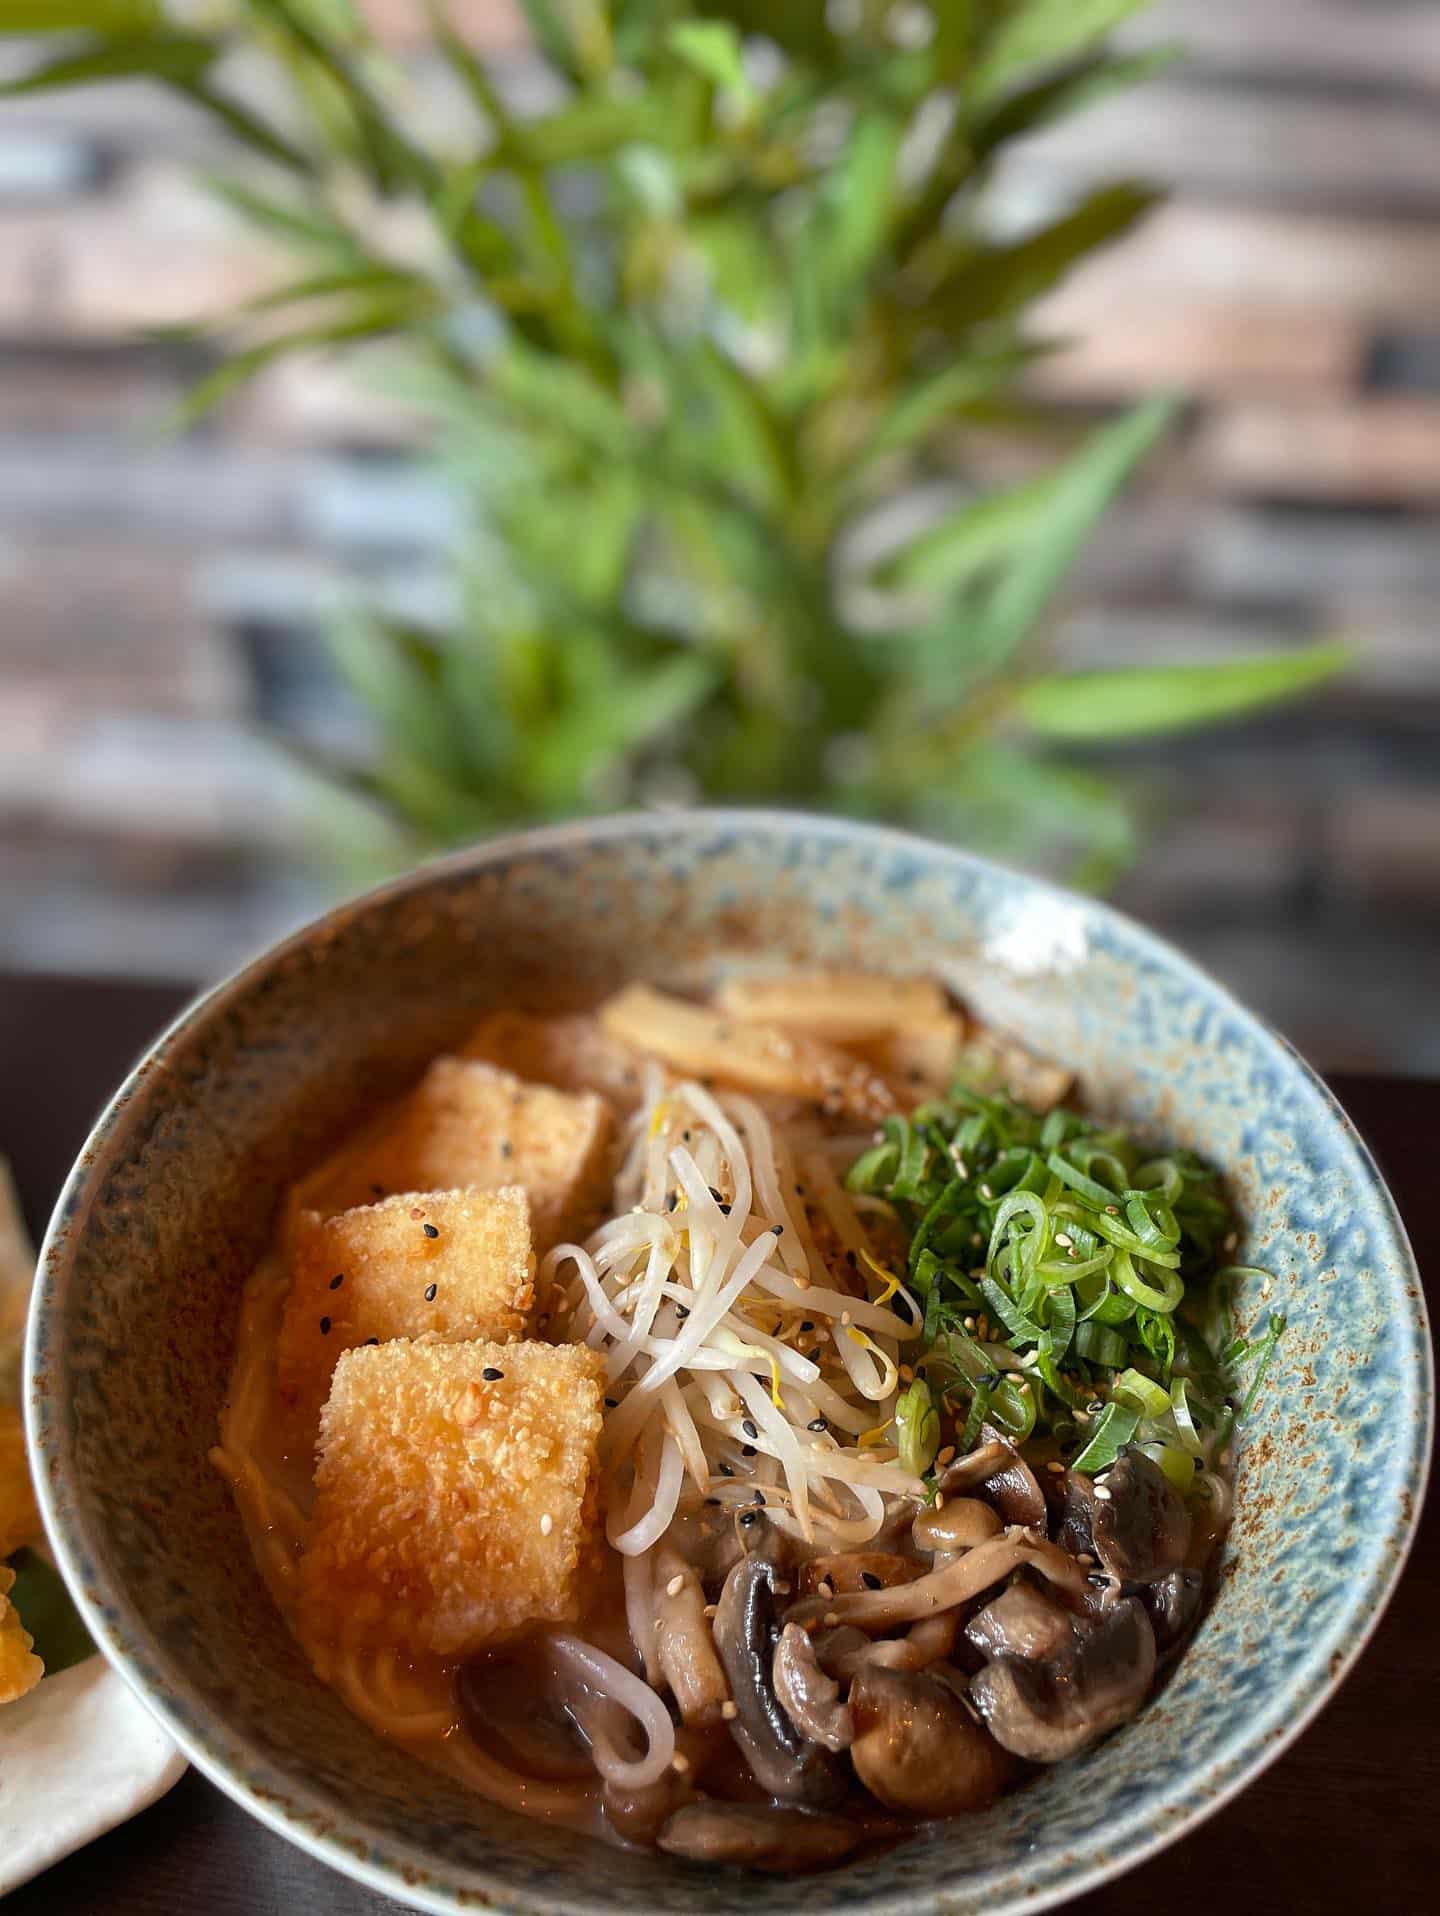 A bowl of ramen with tofu, mushrooms, and greens on the side.